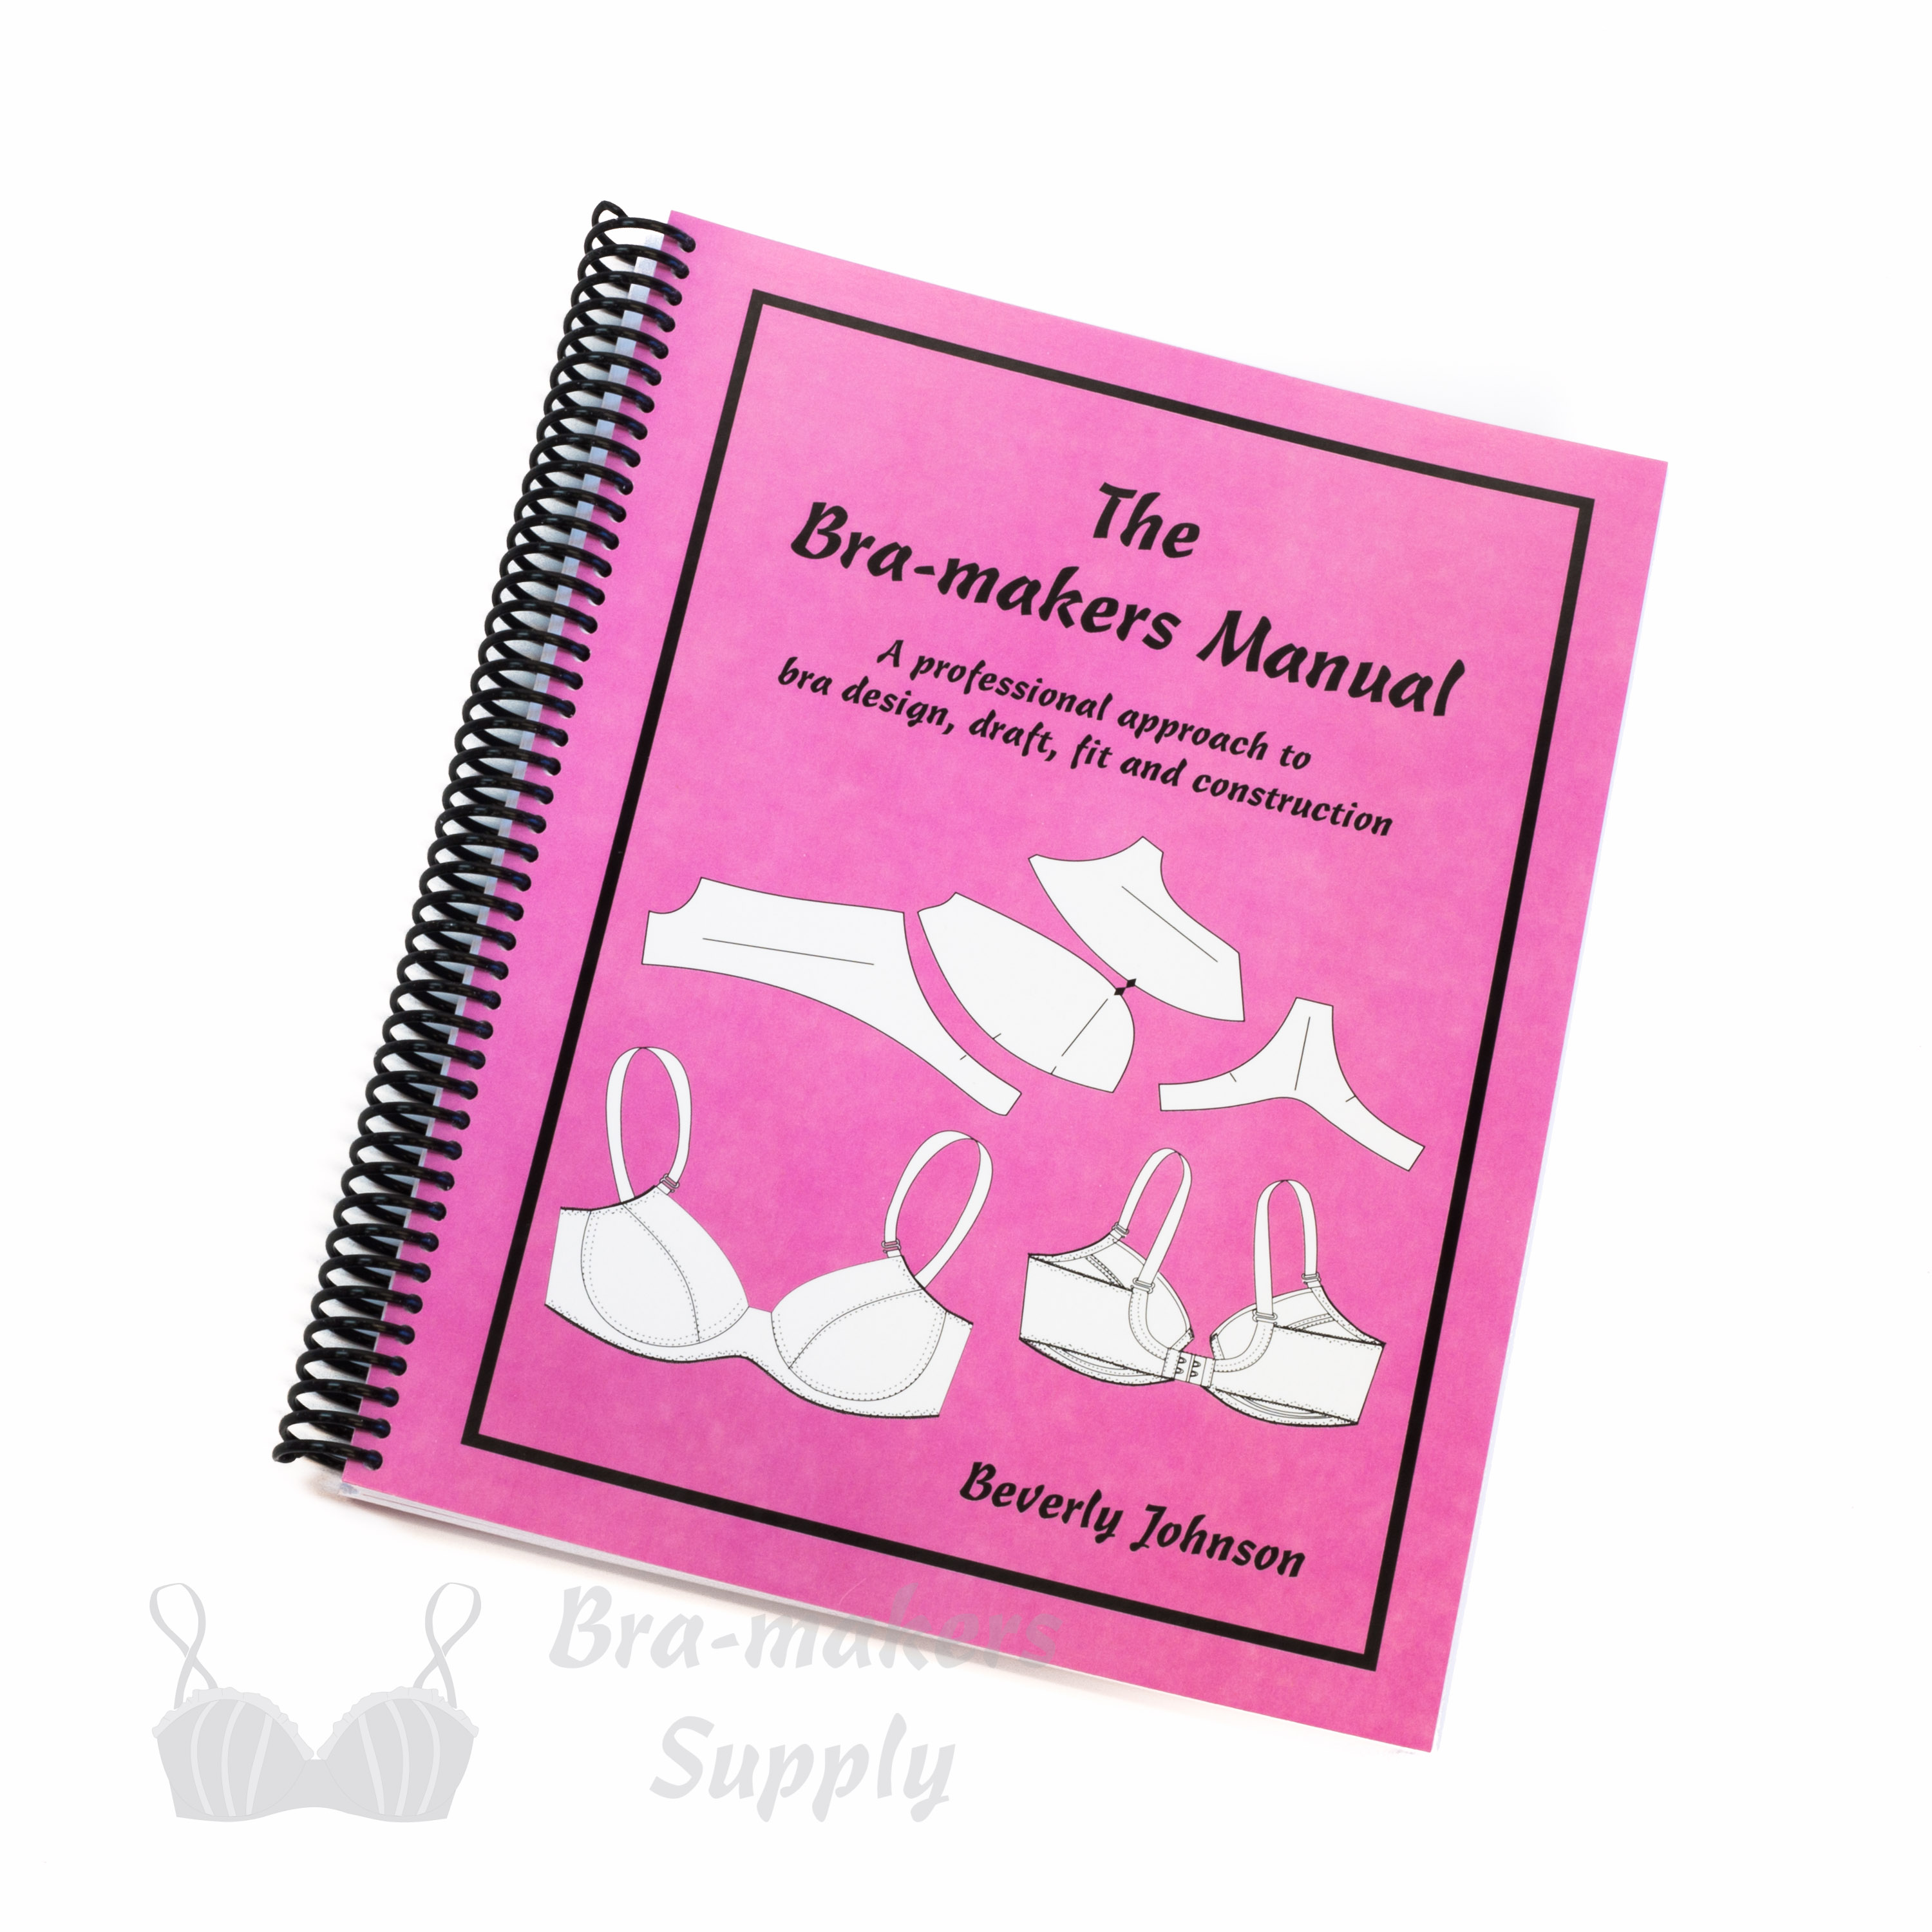 Bra-Makers Manual by Beverly Johnson from Bra-Makers Supply volume 1 book english front cover shown